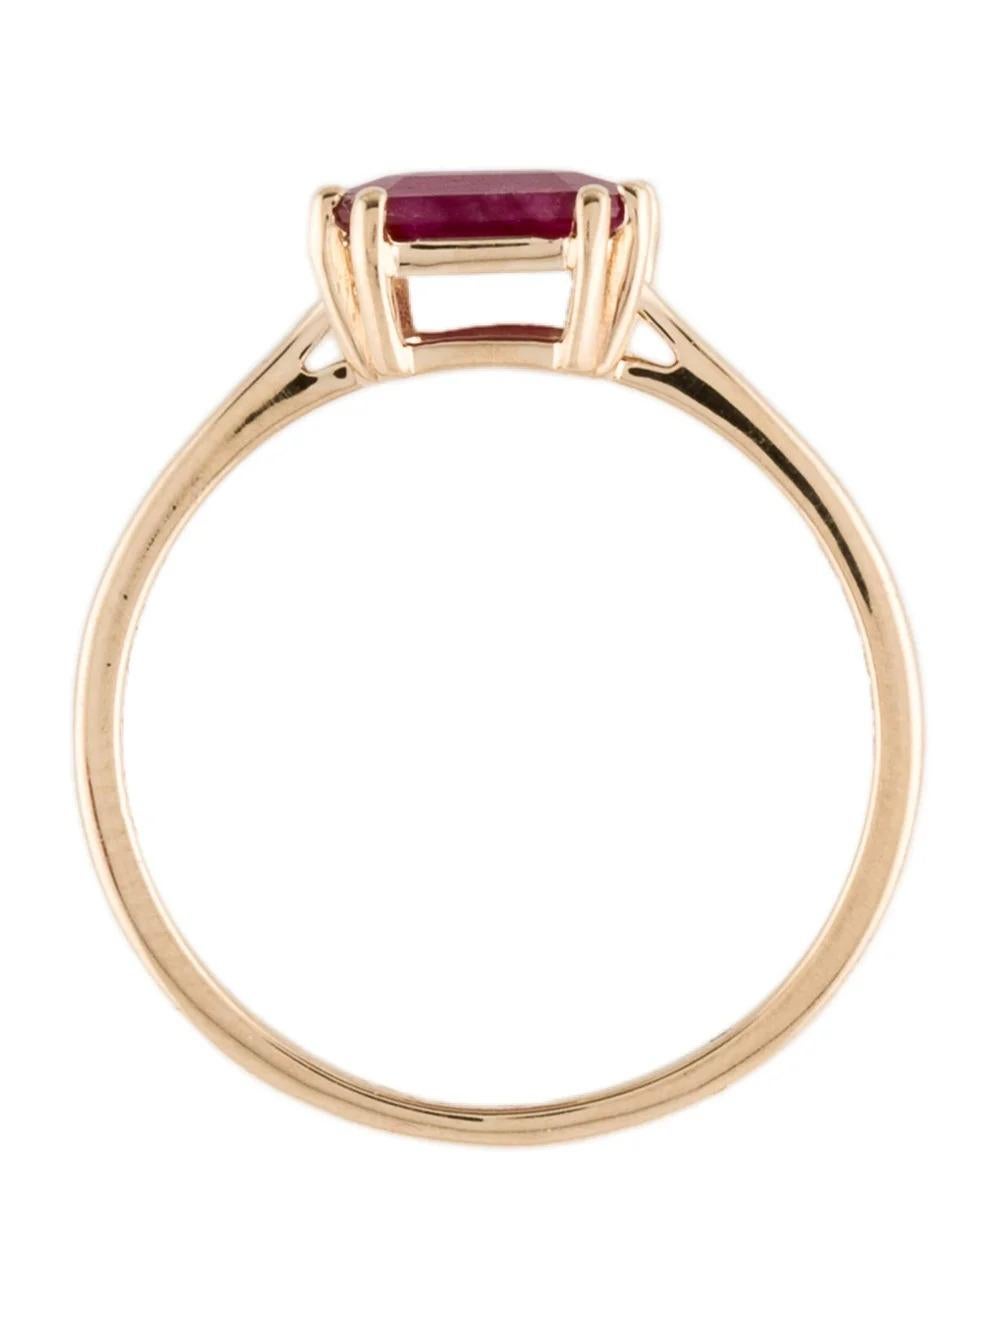 Women's 14K Ruby Cocktail Ring 1.46ct Size 6.75 - Vintage Style Fine Statement Jewelry For Sale